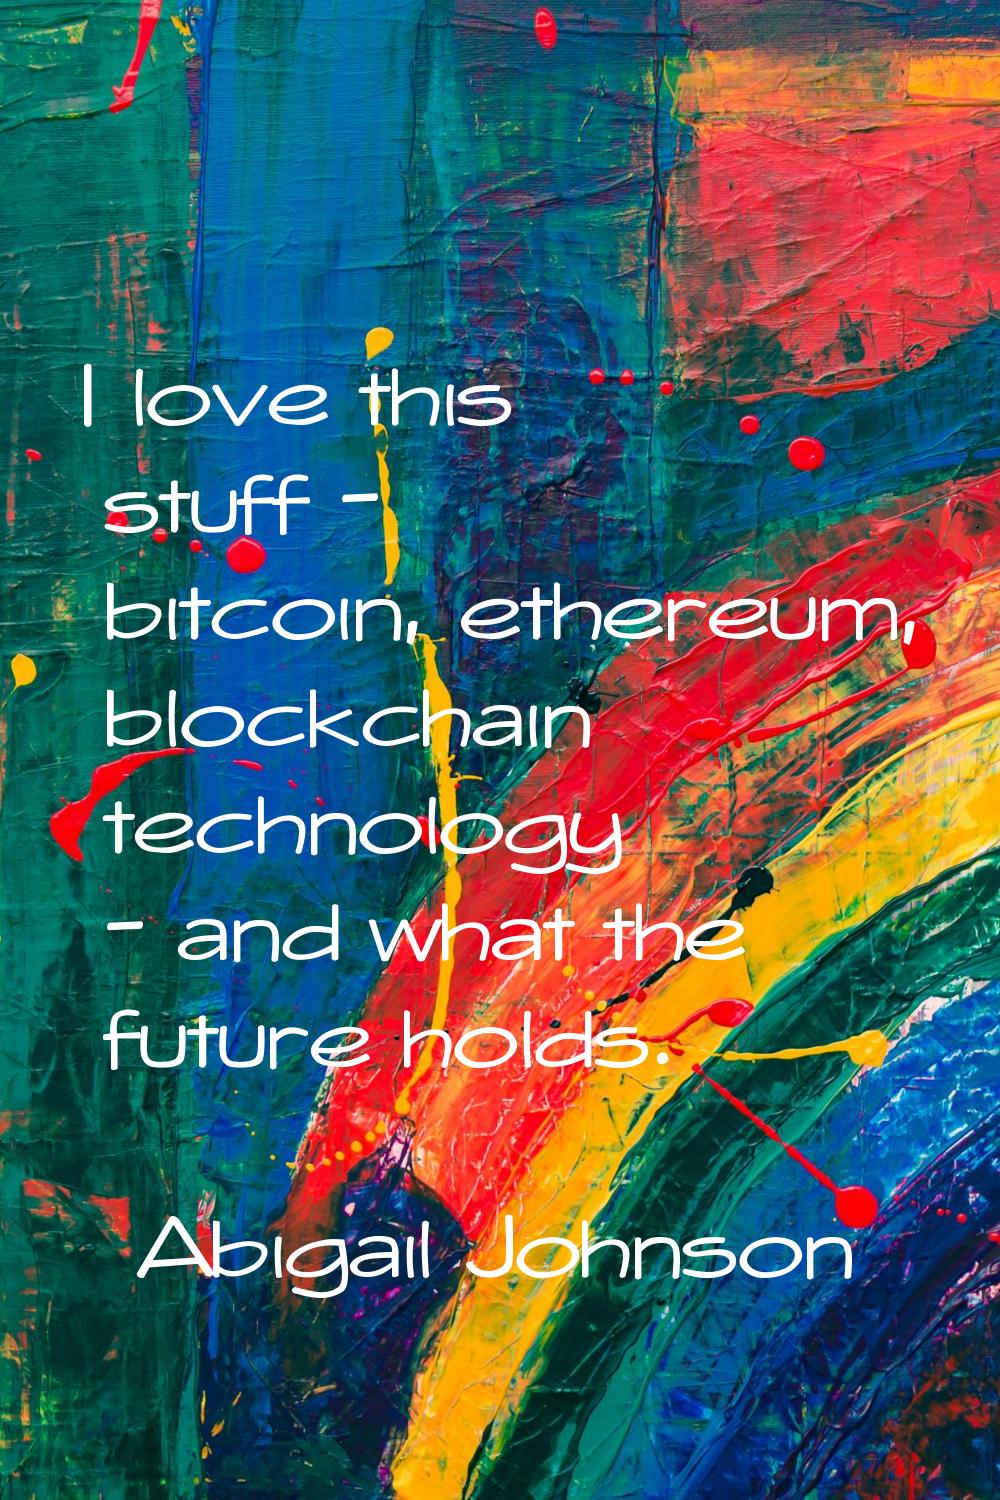 I love this stuff - bitcoin, ethereum, blockchain technology - and what the future holds.